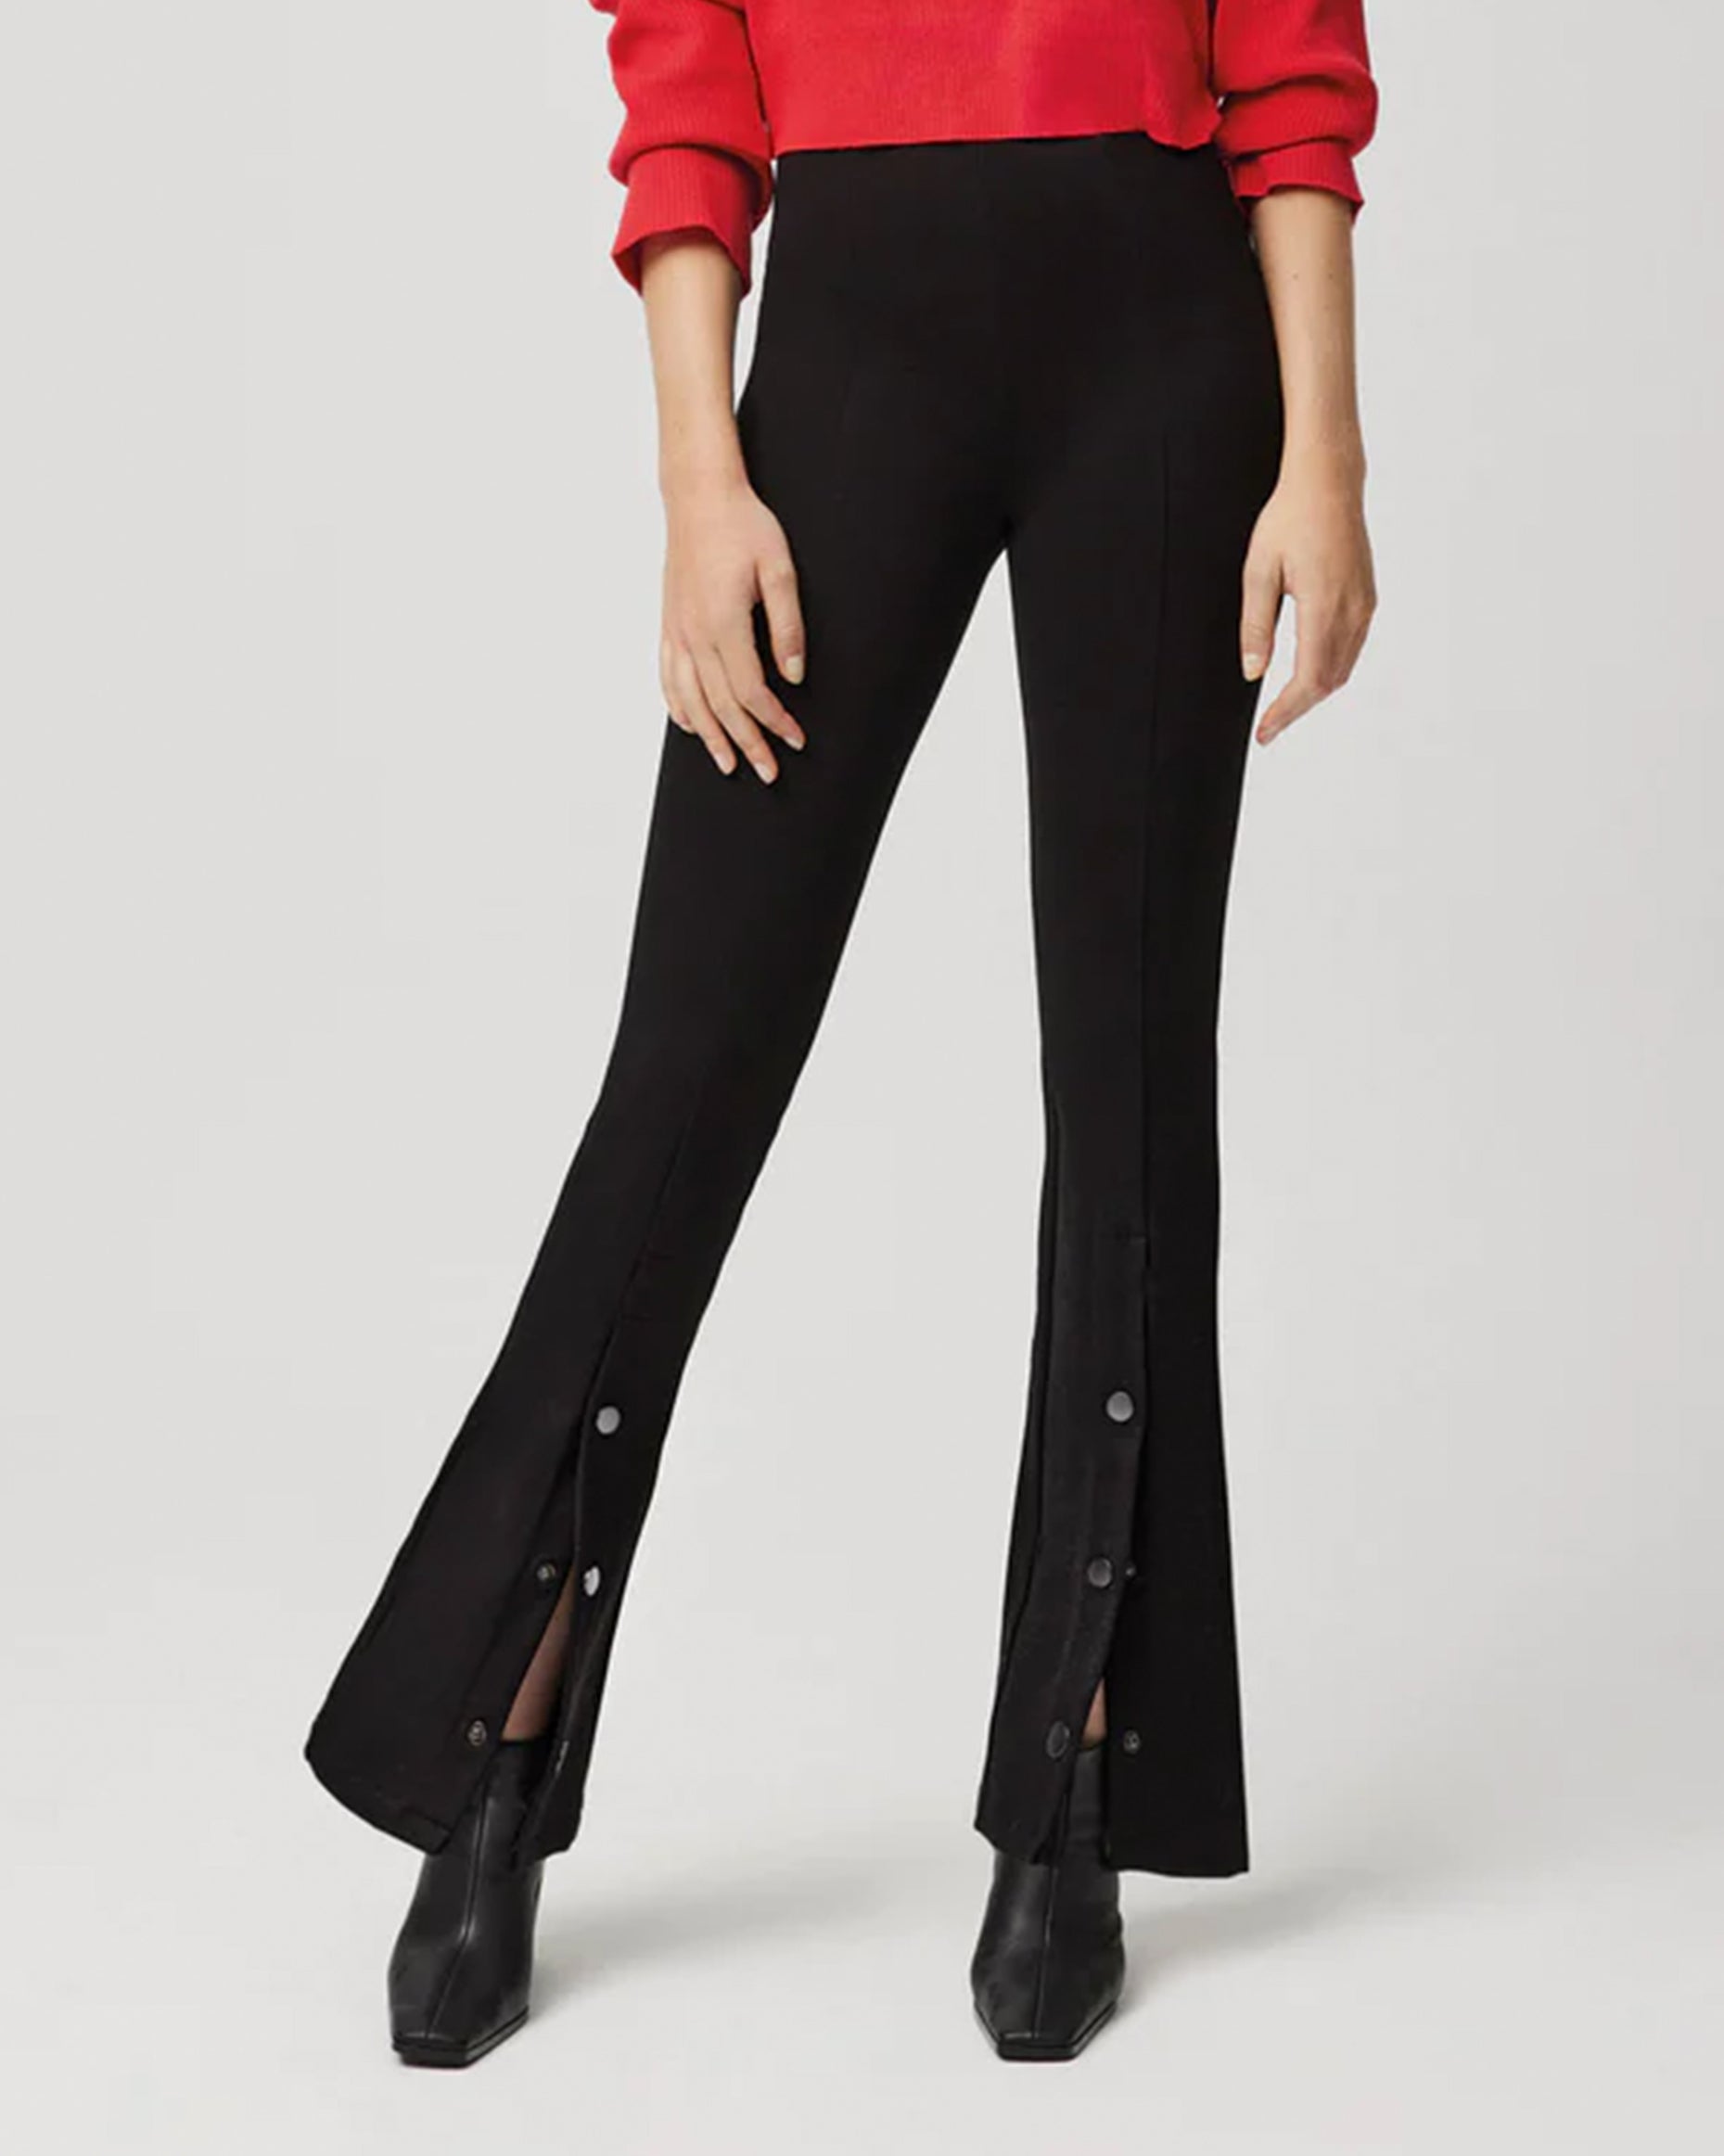 Ysabel Mora 70153 Flared Button Leggings - Black high waisted stretch trouser leggings (treggings) with split buttoned flare bottom. Worn with red sweater and black ankle boots.